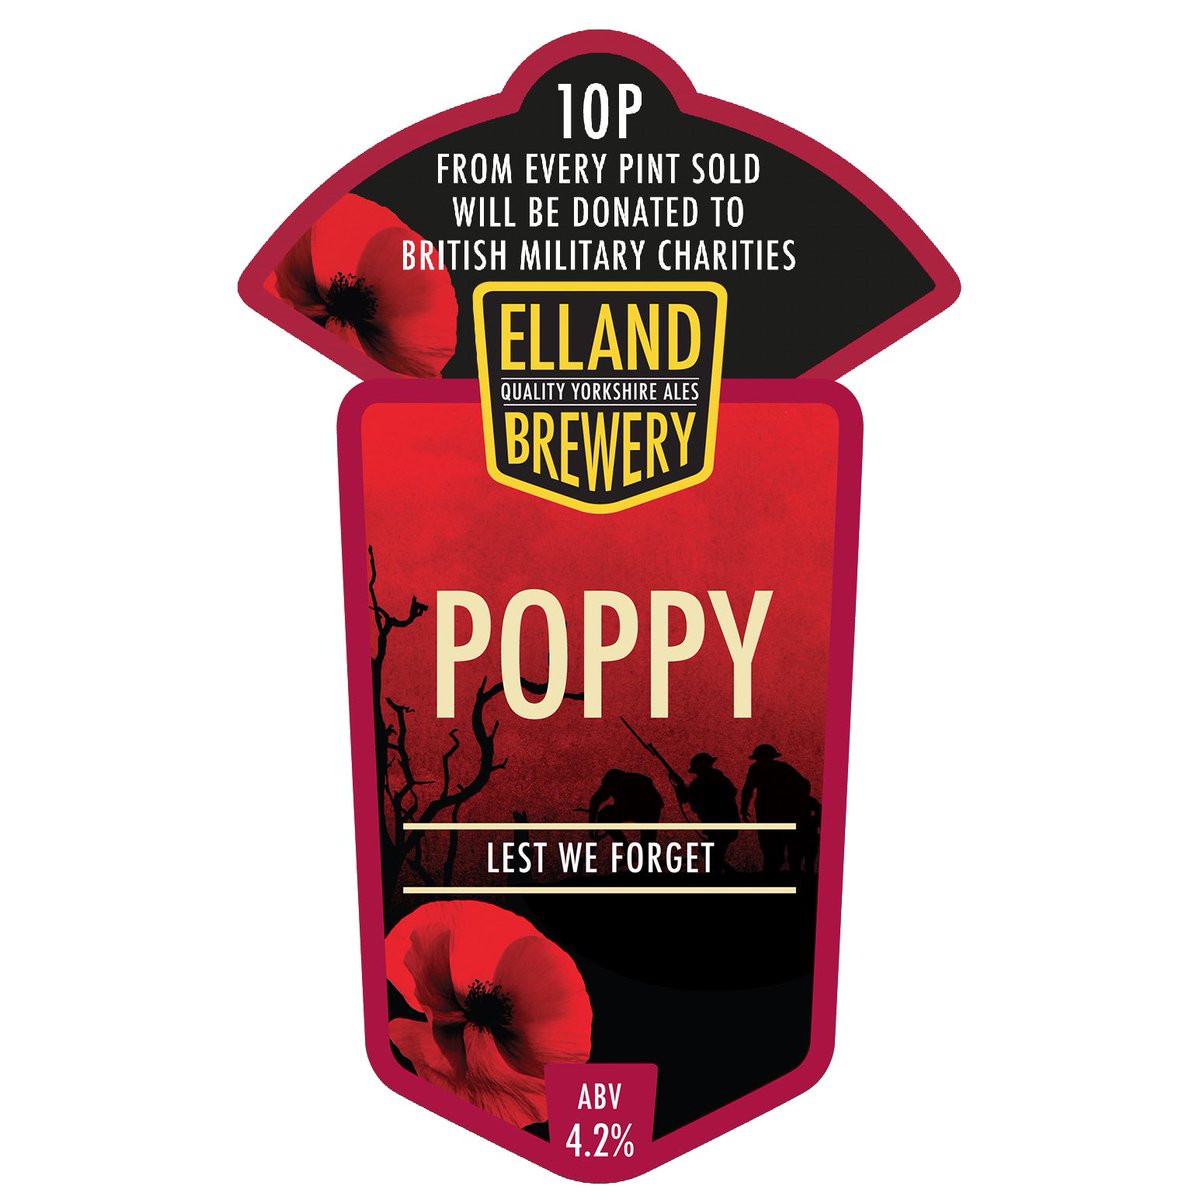 Our new charity brew: Poppy (4.2%) - A classic British pale, light citrus fruit on the nose, a touch of red malt and a satisfying dry finish. 10p of every pint sold will be donated to UK military charities. “At the going down of the sun and in the morning, we will remember them.”